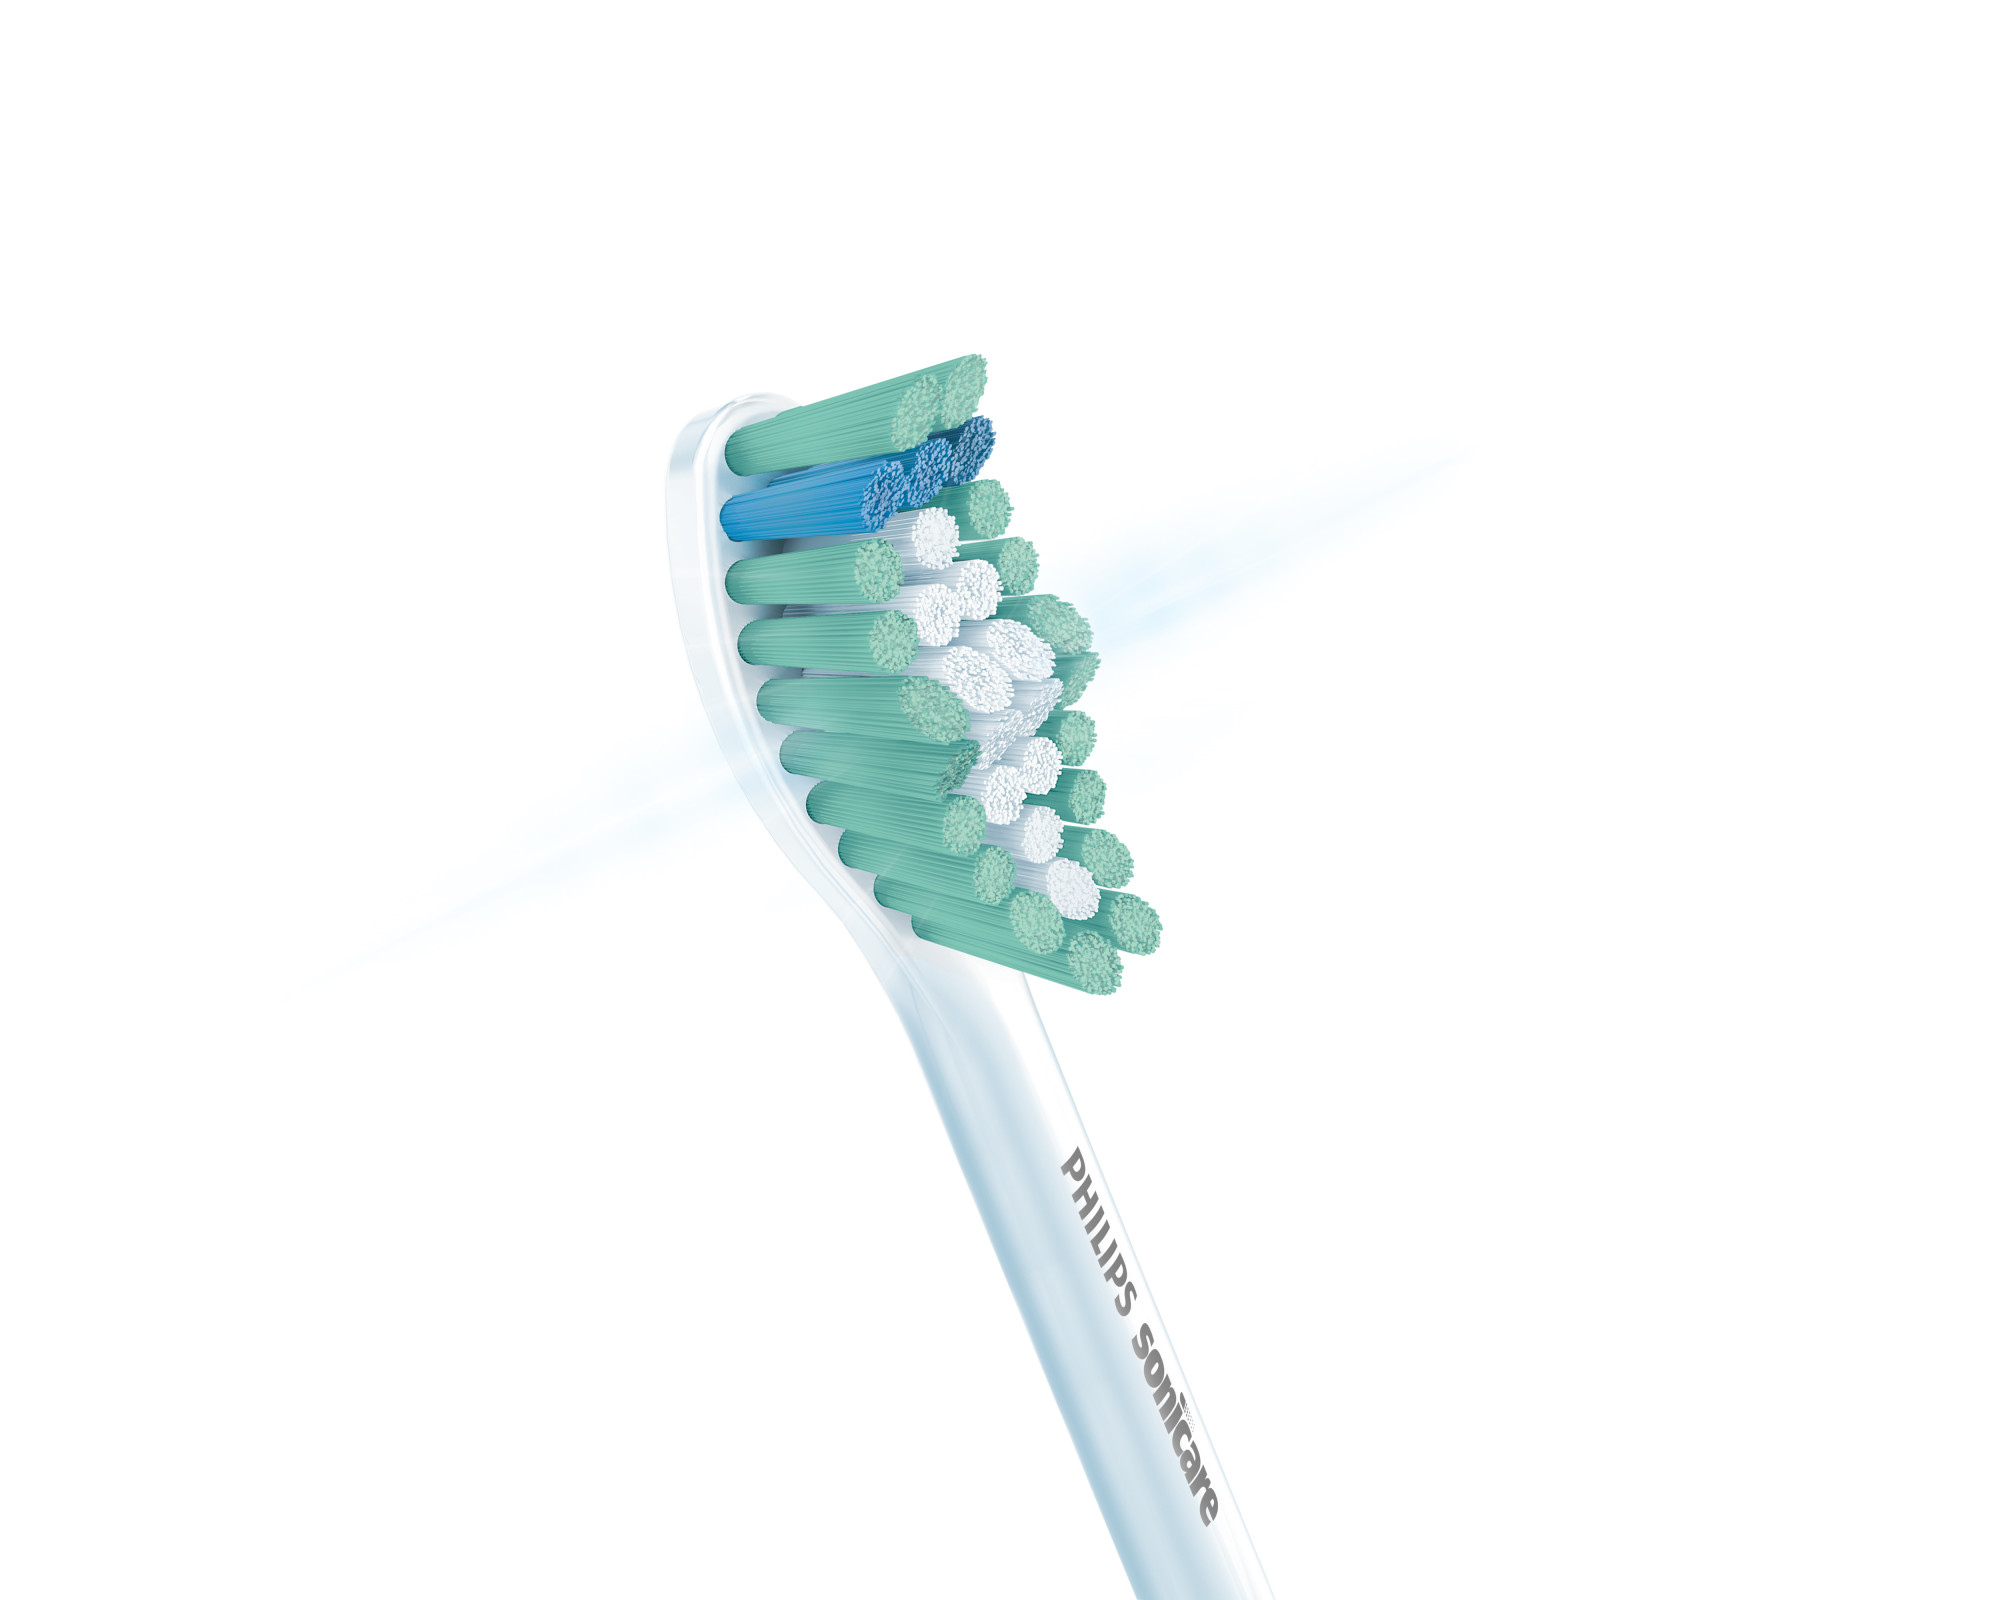 Philips Sonicare E-Series Replacement Toothbrush Heads, HX7022/66, 2-pk - image 5 of 7